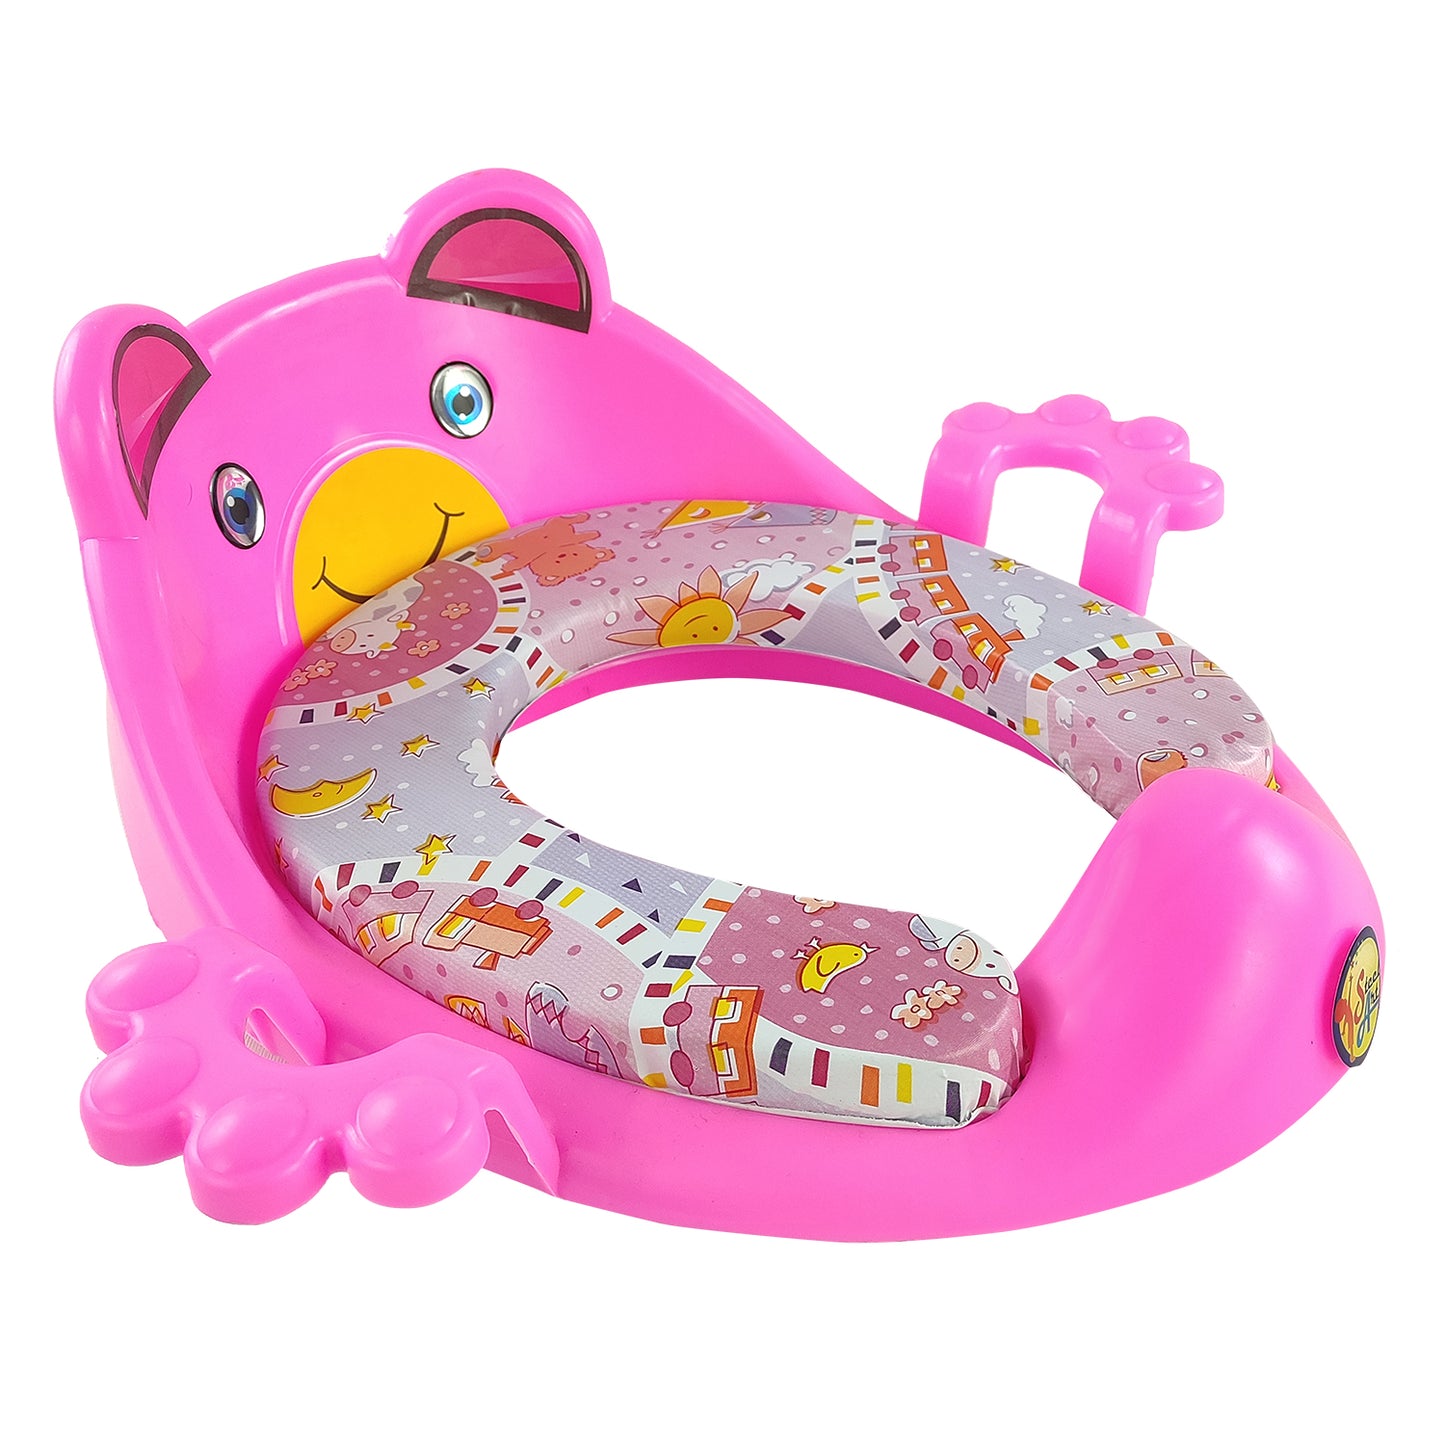 NHR Baby Foam Potty Seat with Handles (Choose Any Color)